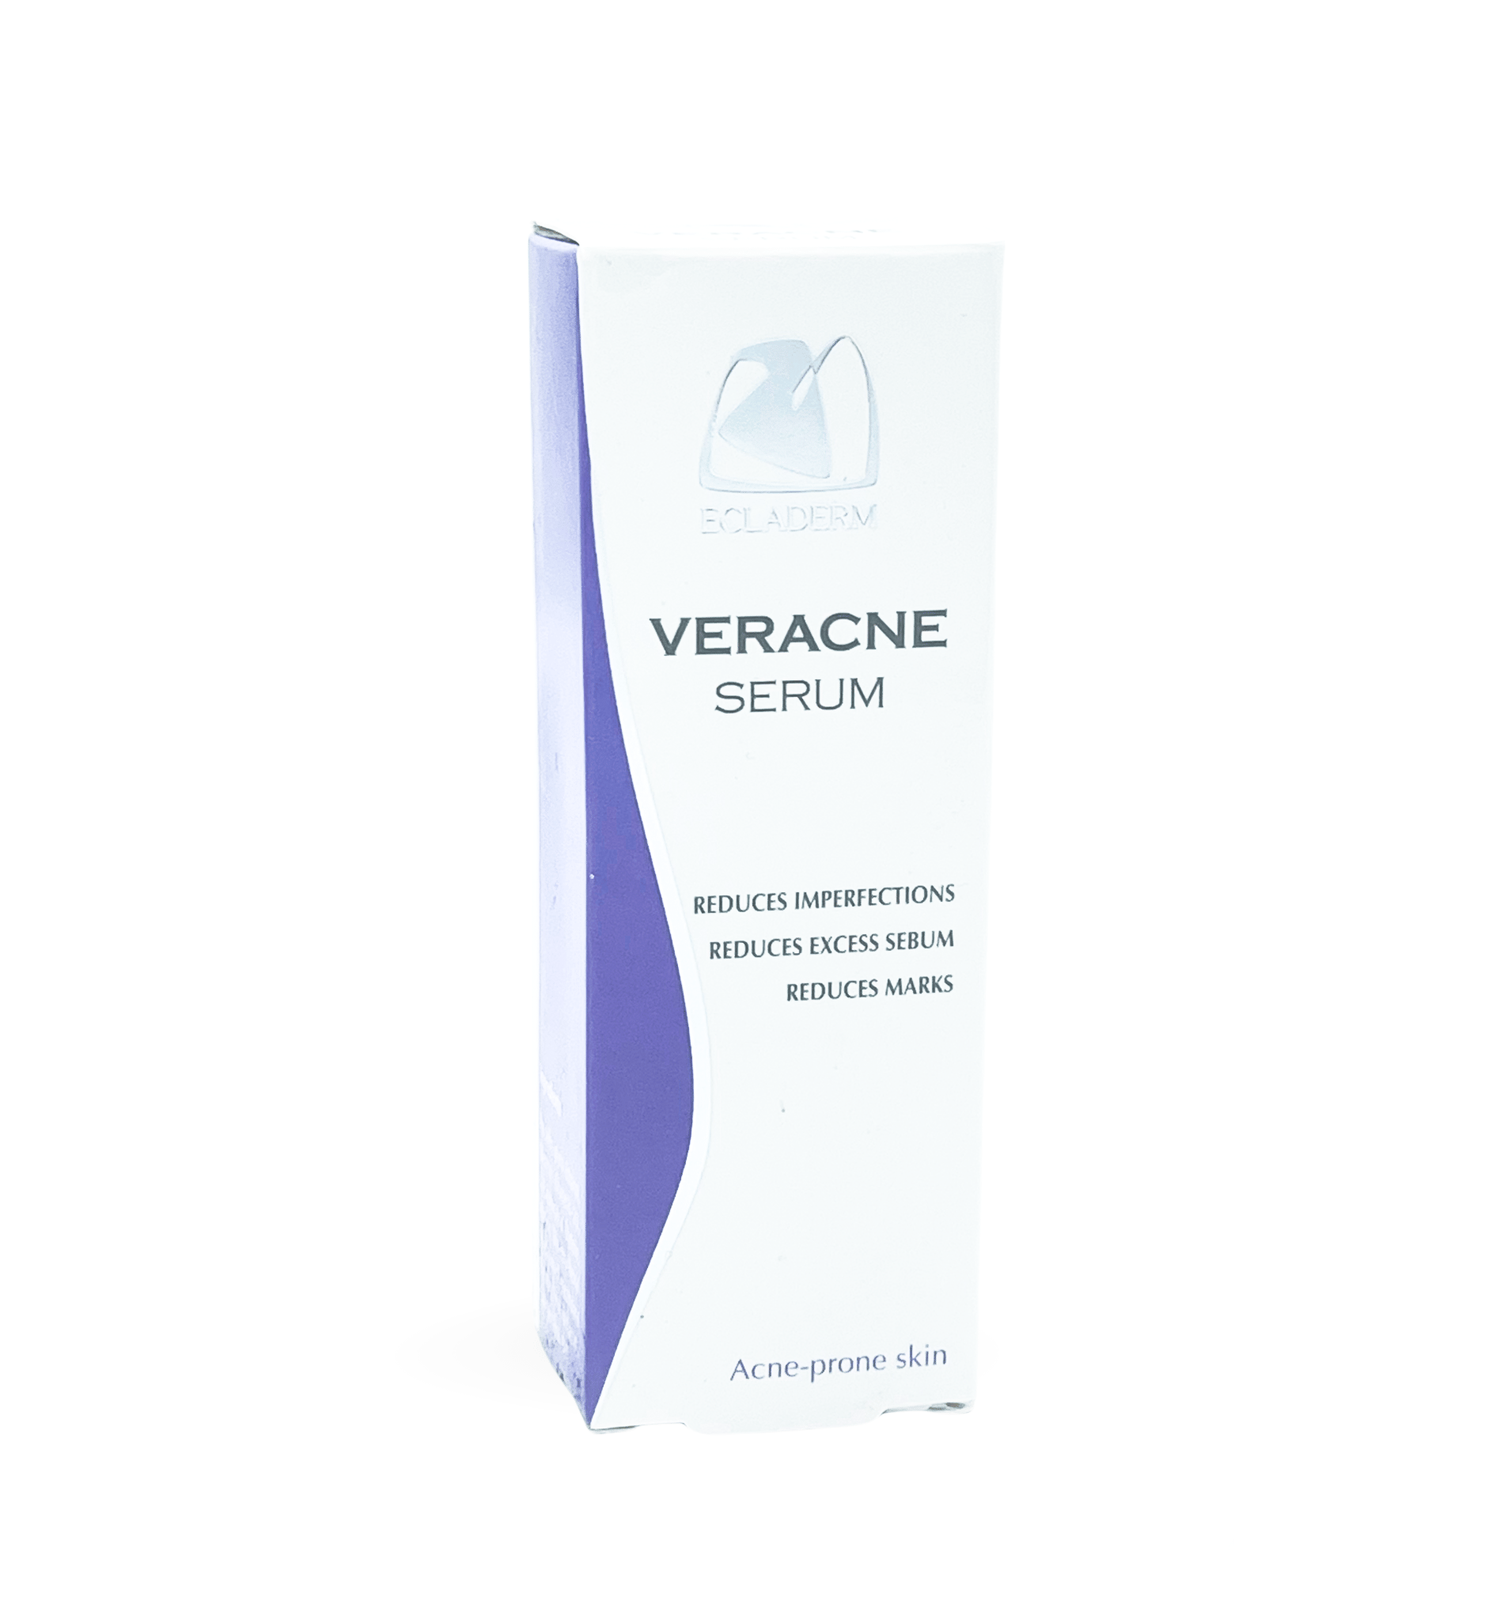 Veracne Serum anti-imperfection serum for oily and acne-prone skin from Ecladerm